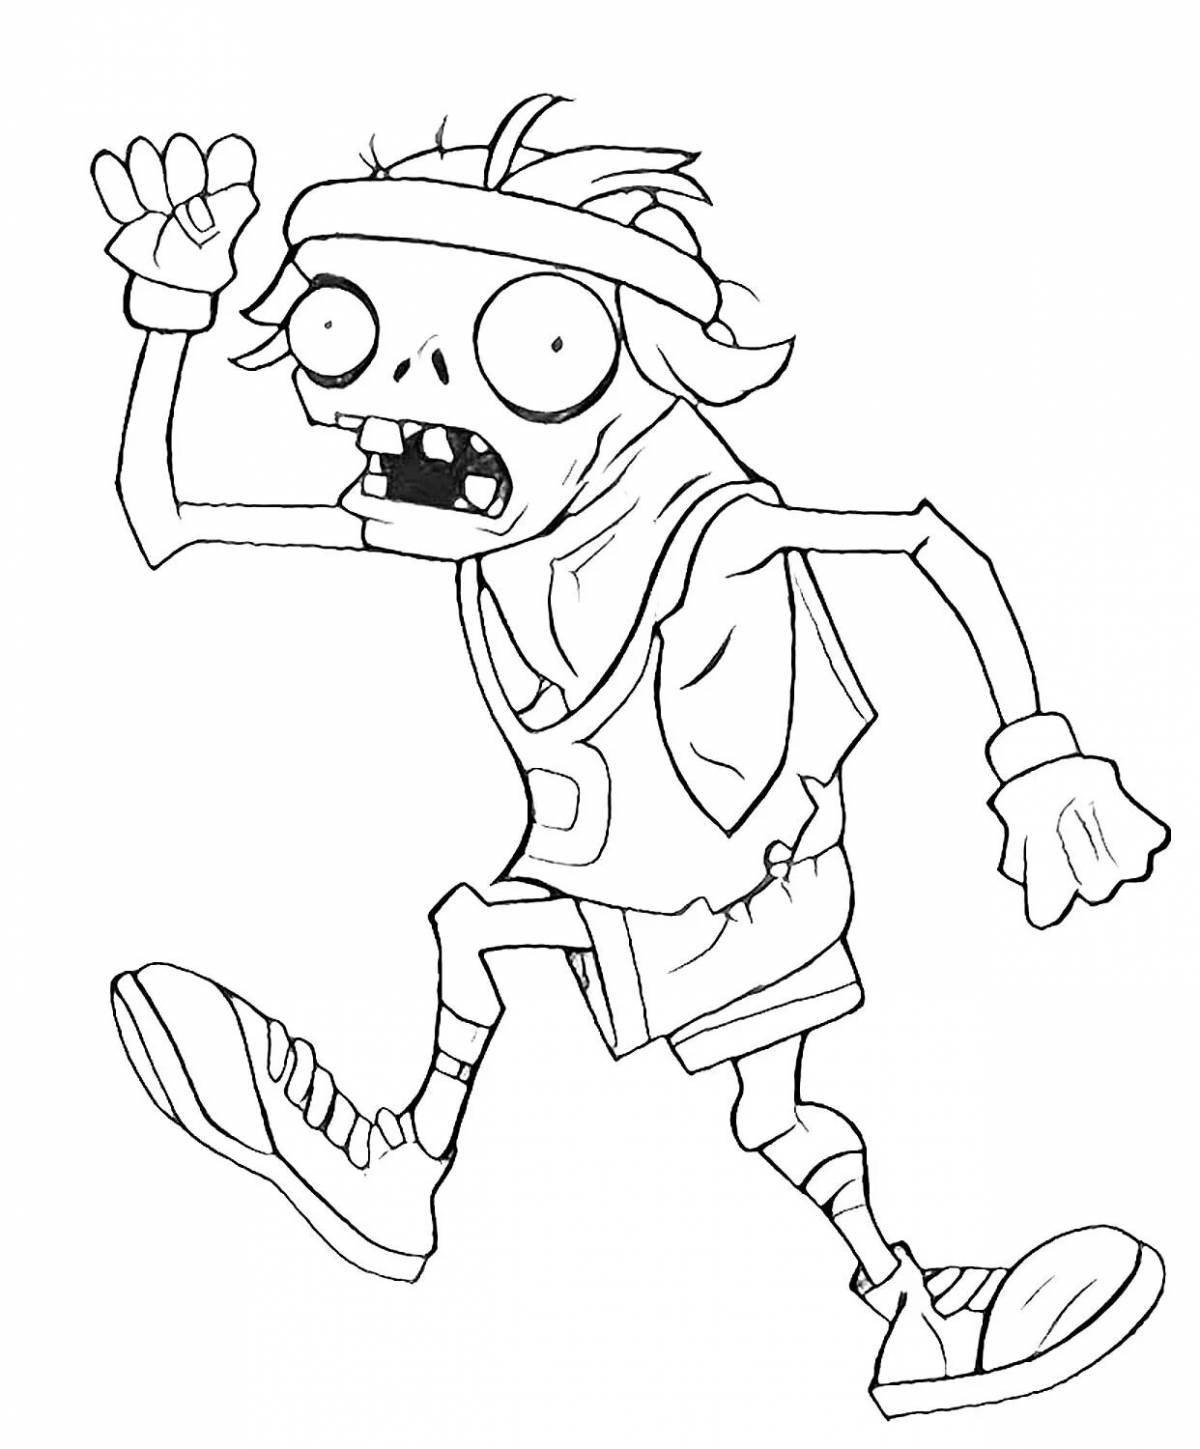 Alarming zombie planet coloring page